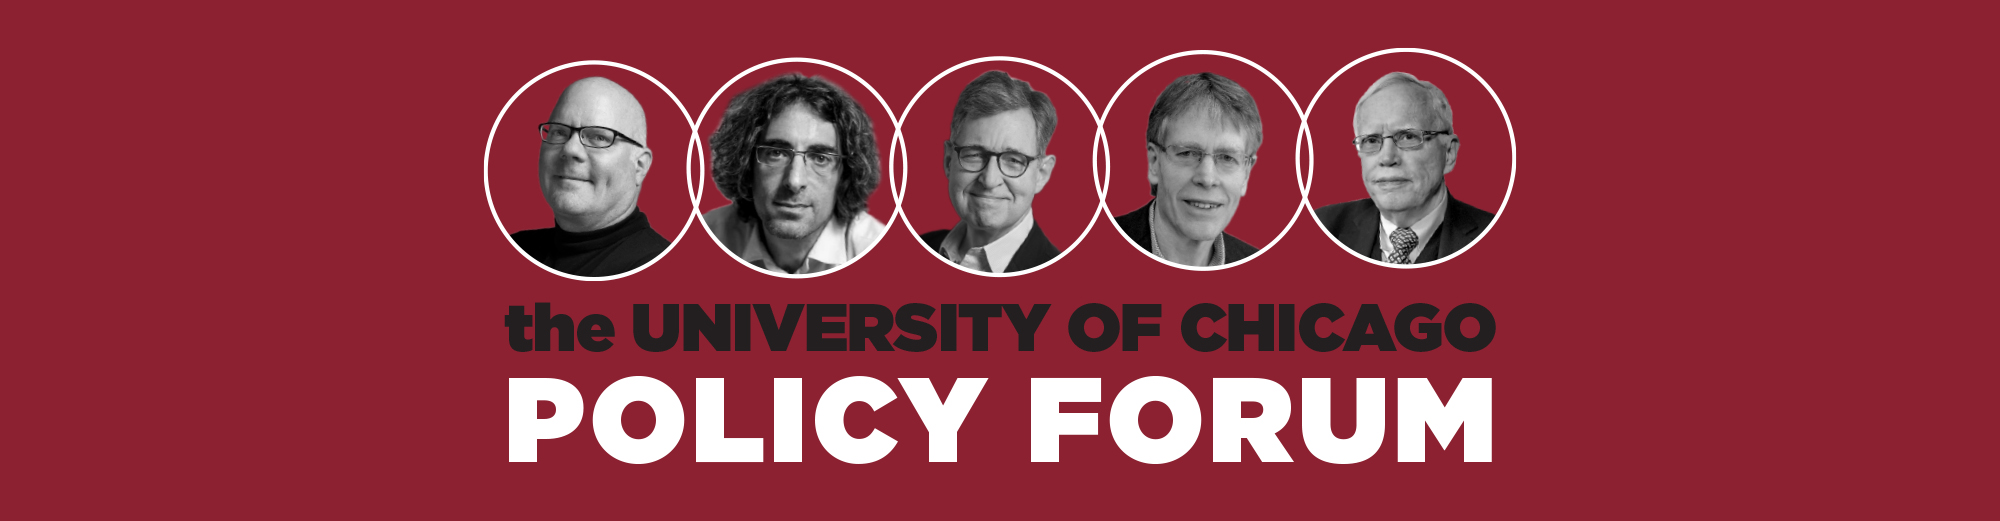 Graphic reads "the University of Chicago Policy Forum" with panelists and moderators pictured above.